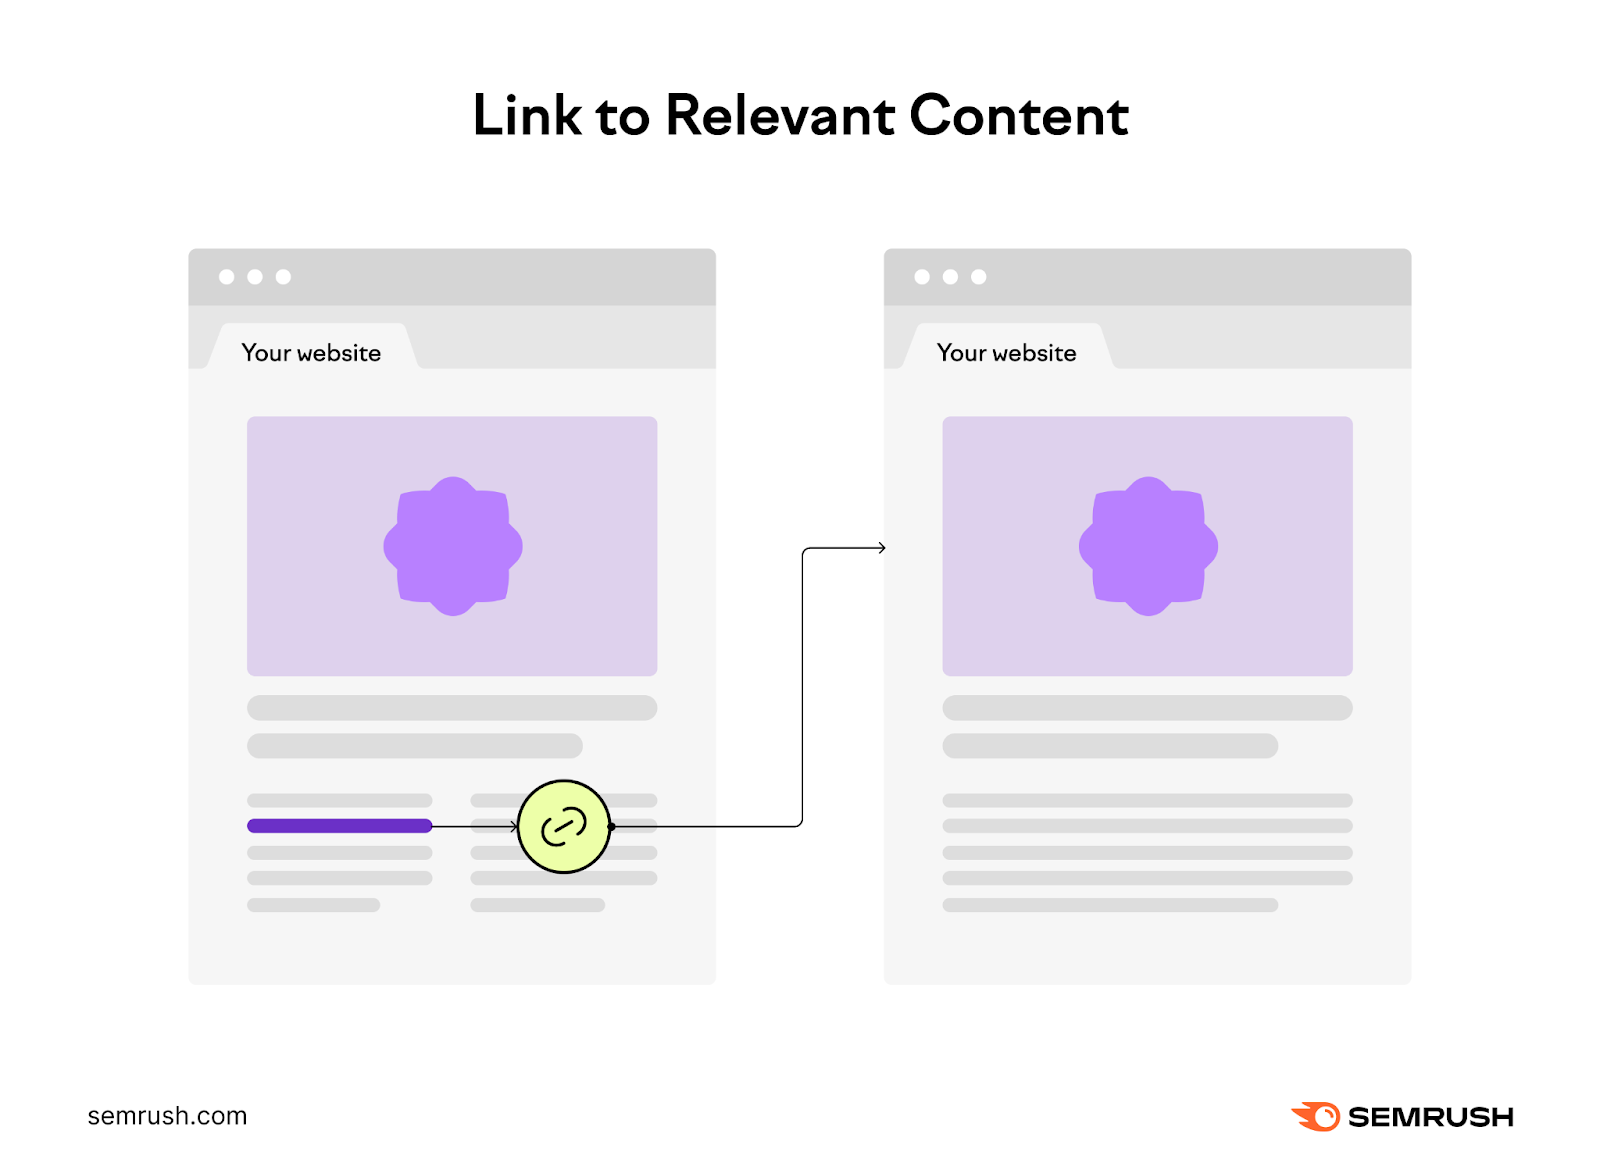 An internal link from one page on your website (left) to another page with relevant content (right)